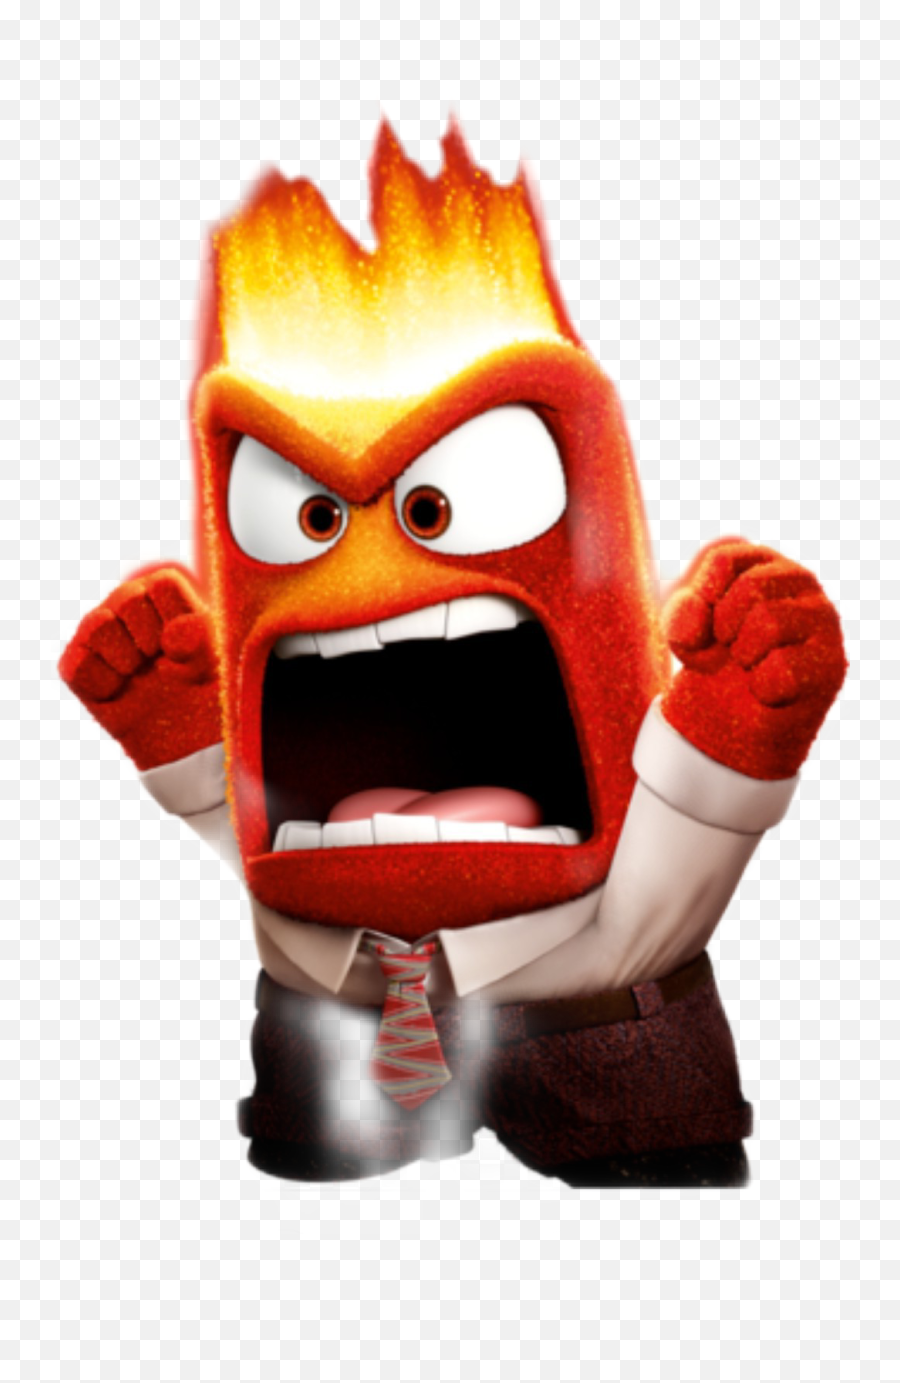 Angry Emoji Sticker By Carazmatic - Inside Out Anger Clipart,Red Angry Emoji